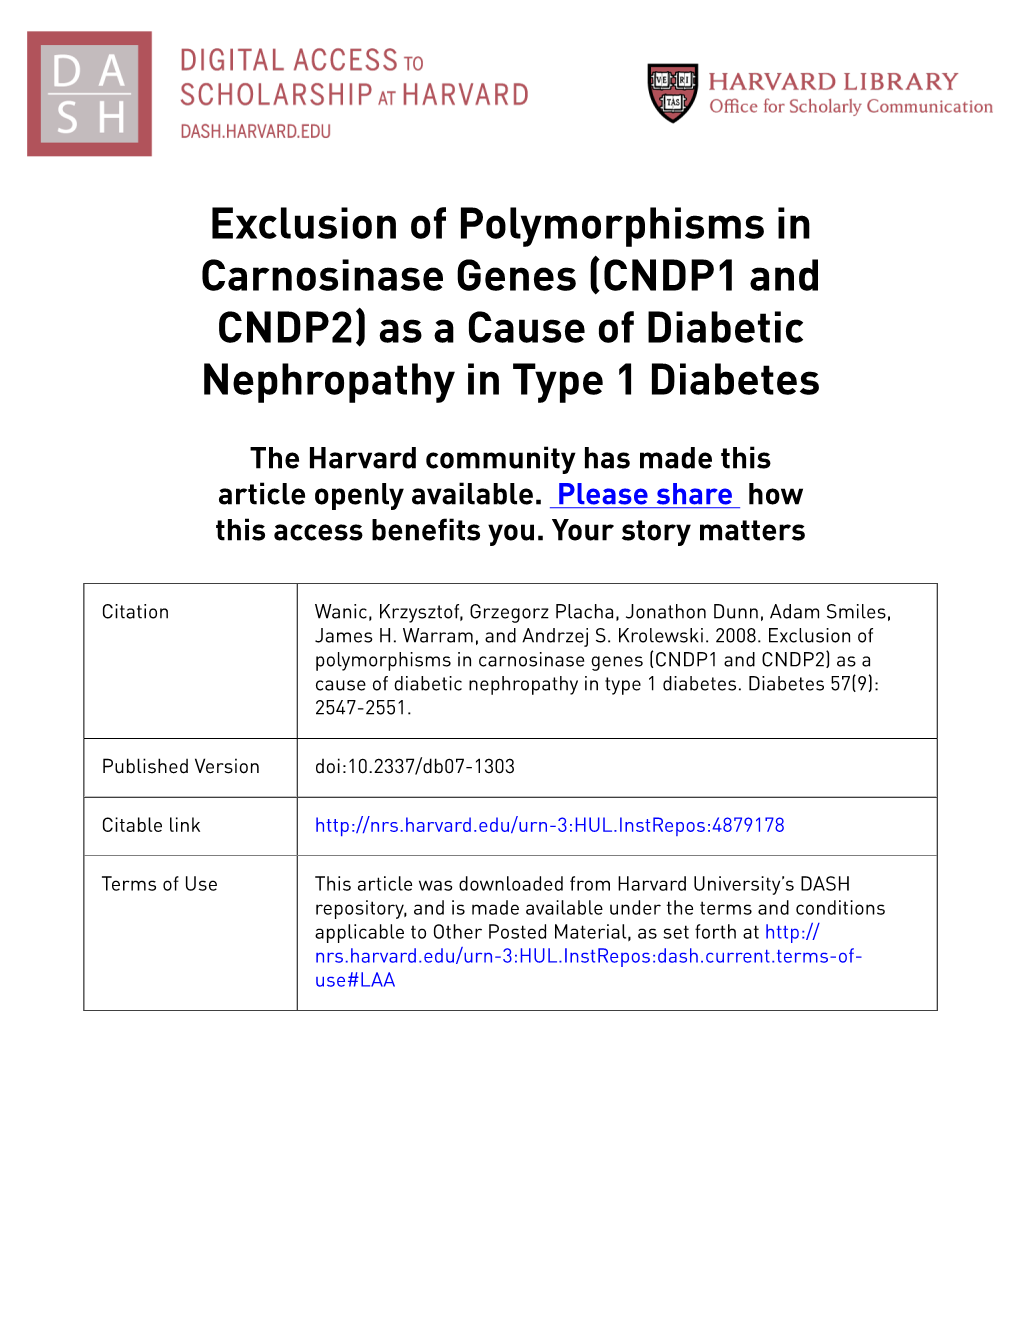 Exclusion of Polymorphisms in Carnosinase Genes (CNDP1 and CNDP2) As a Cause of Diabetic Nephropathy in Type 1 Diabetes